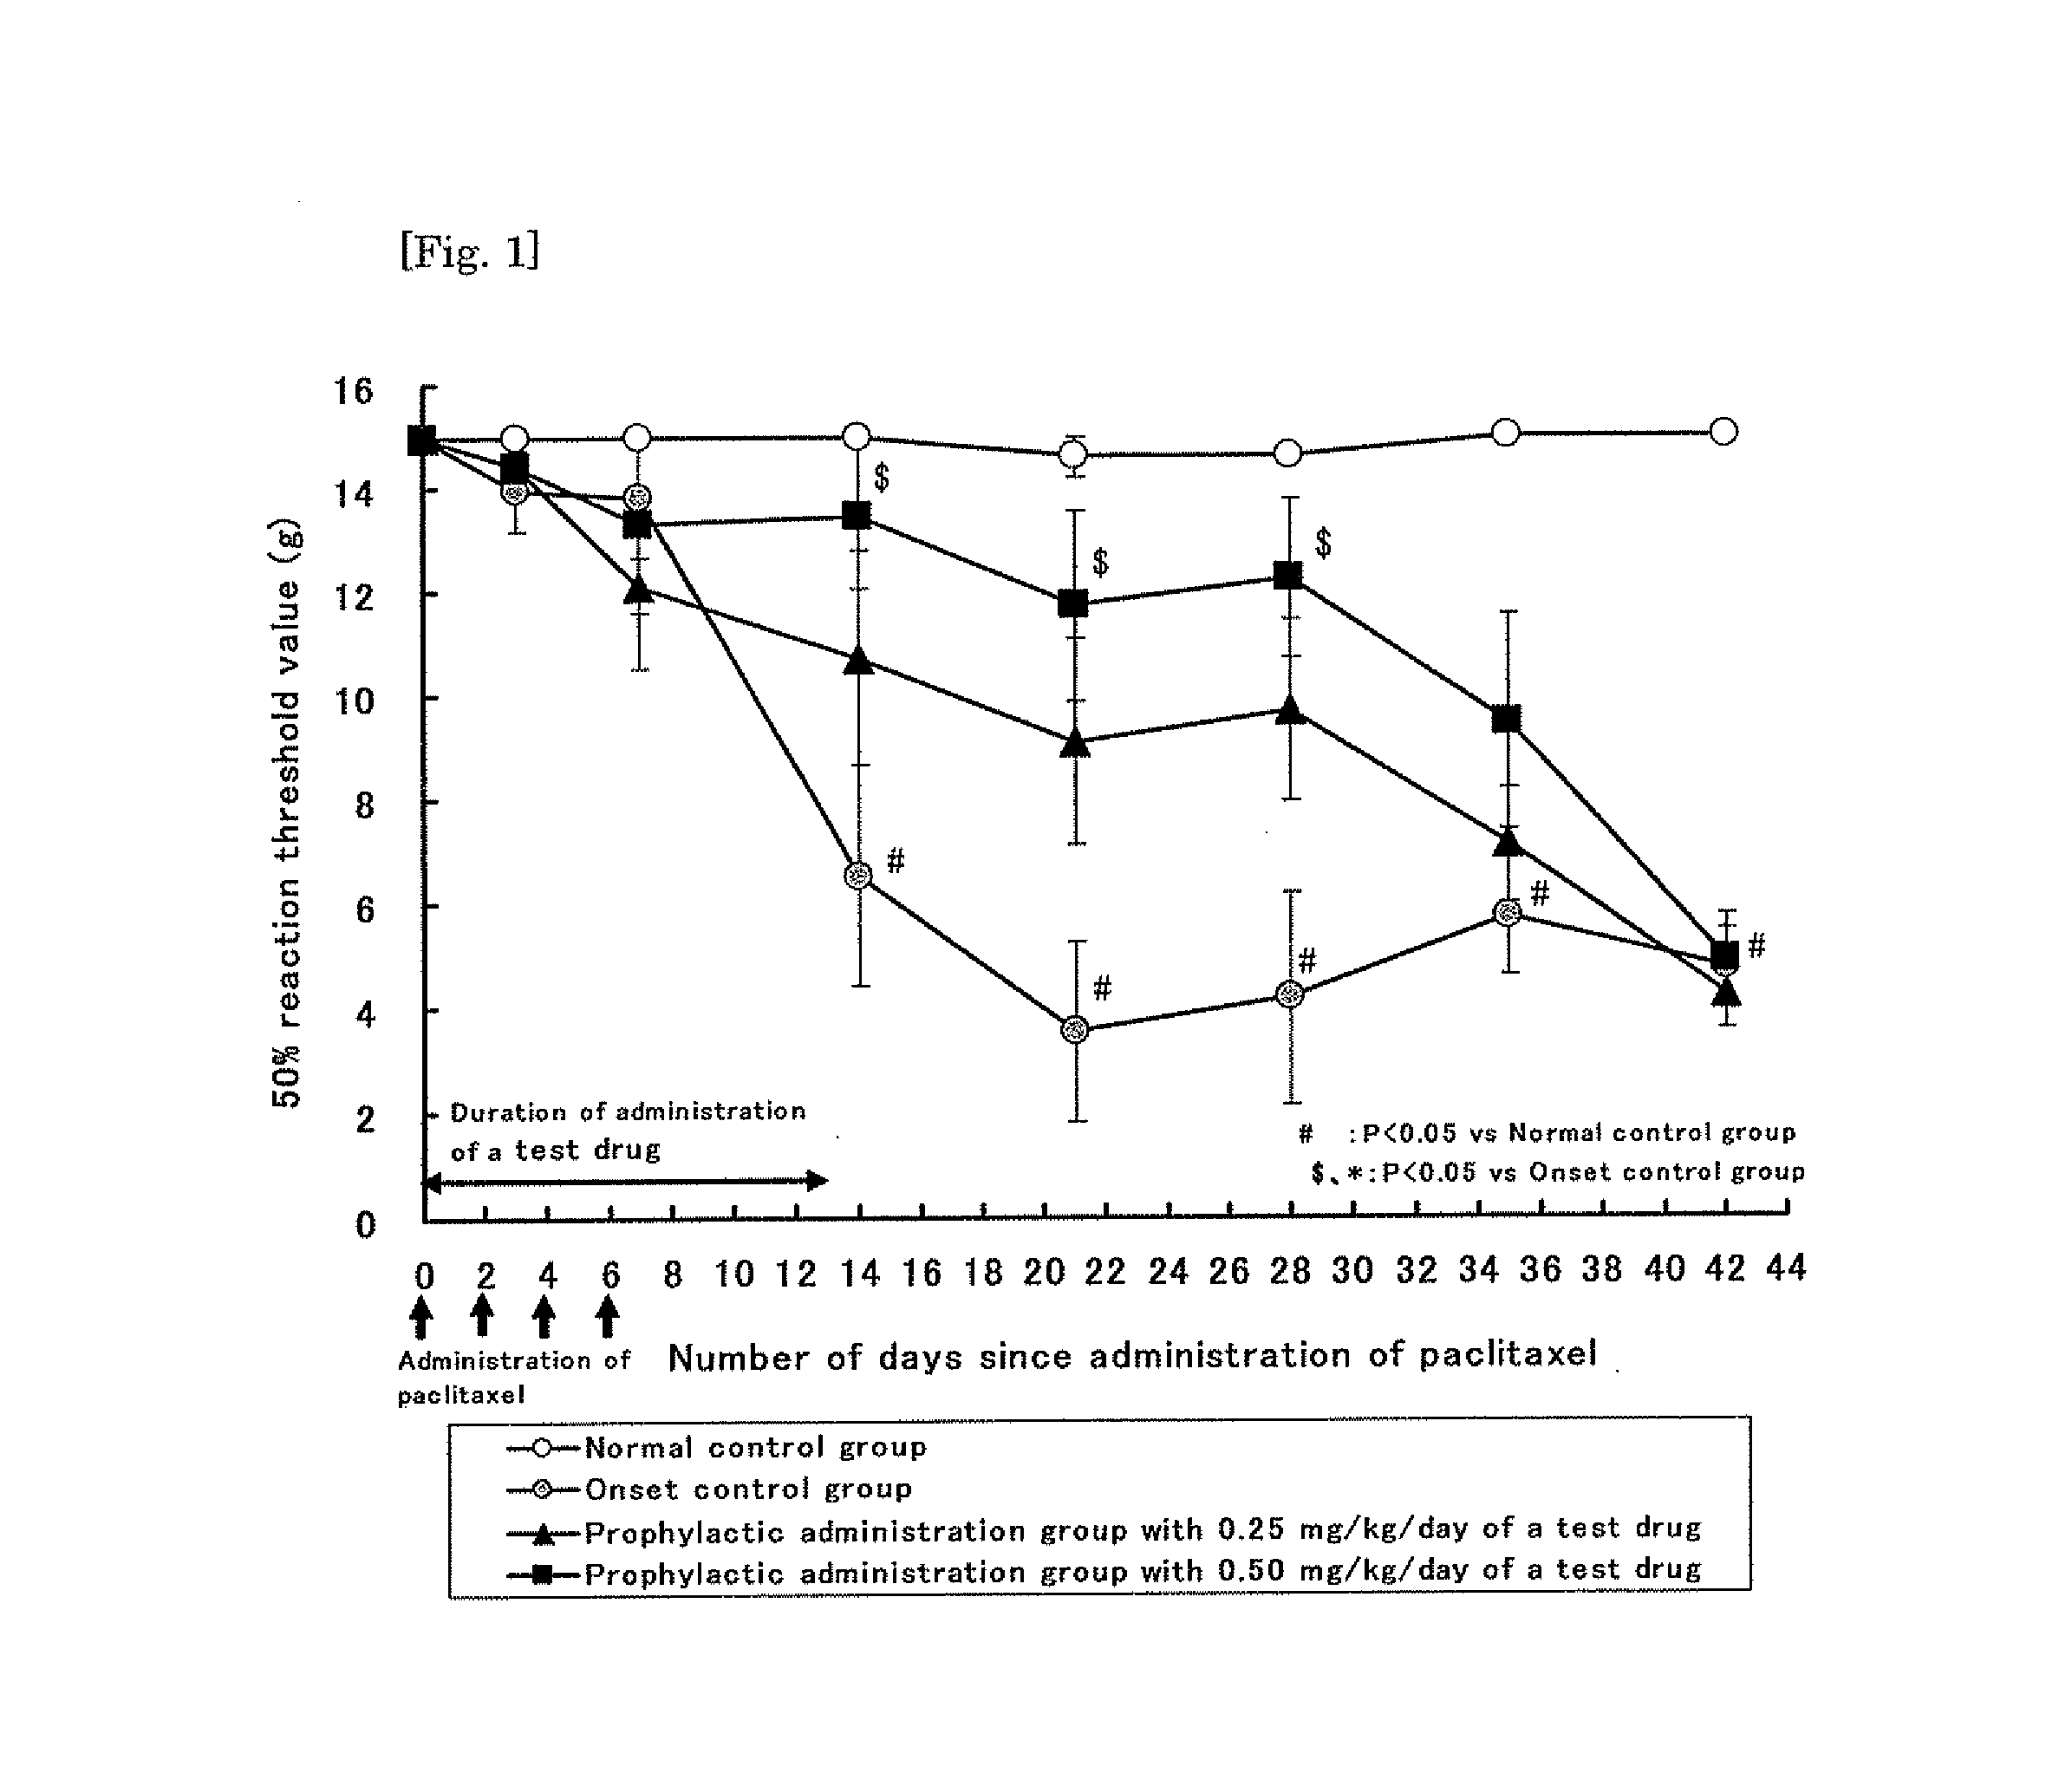 Prophylactic or therapeutic agent for a peripheral nerve disorder induced by Anti-cancer agents